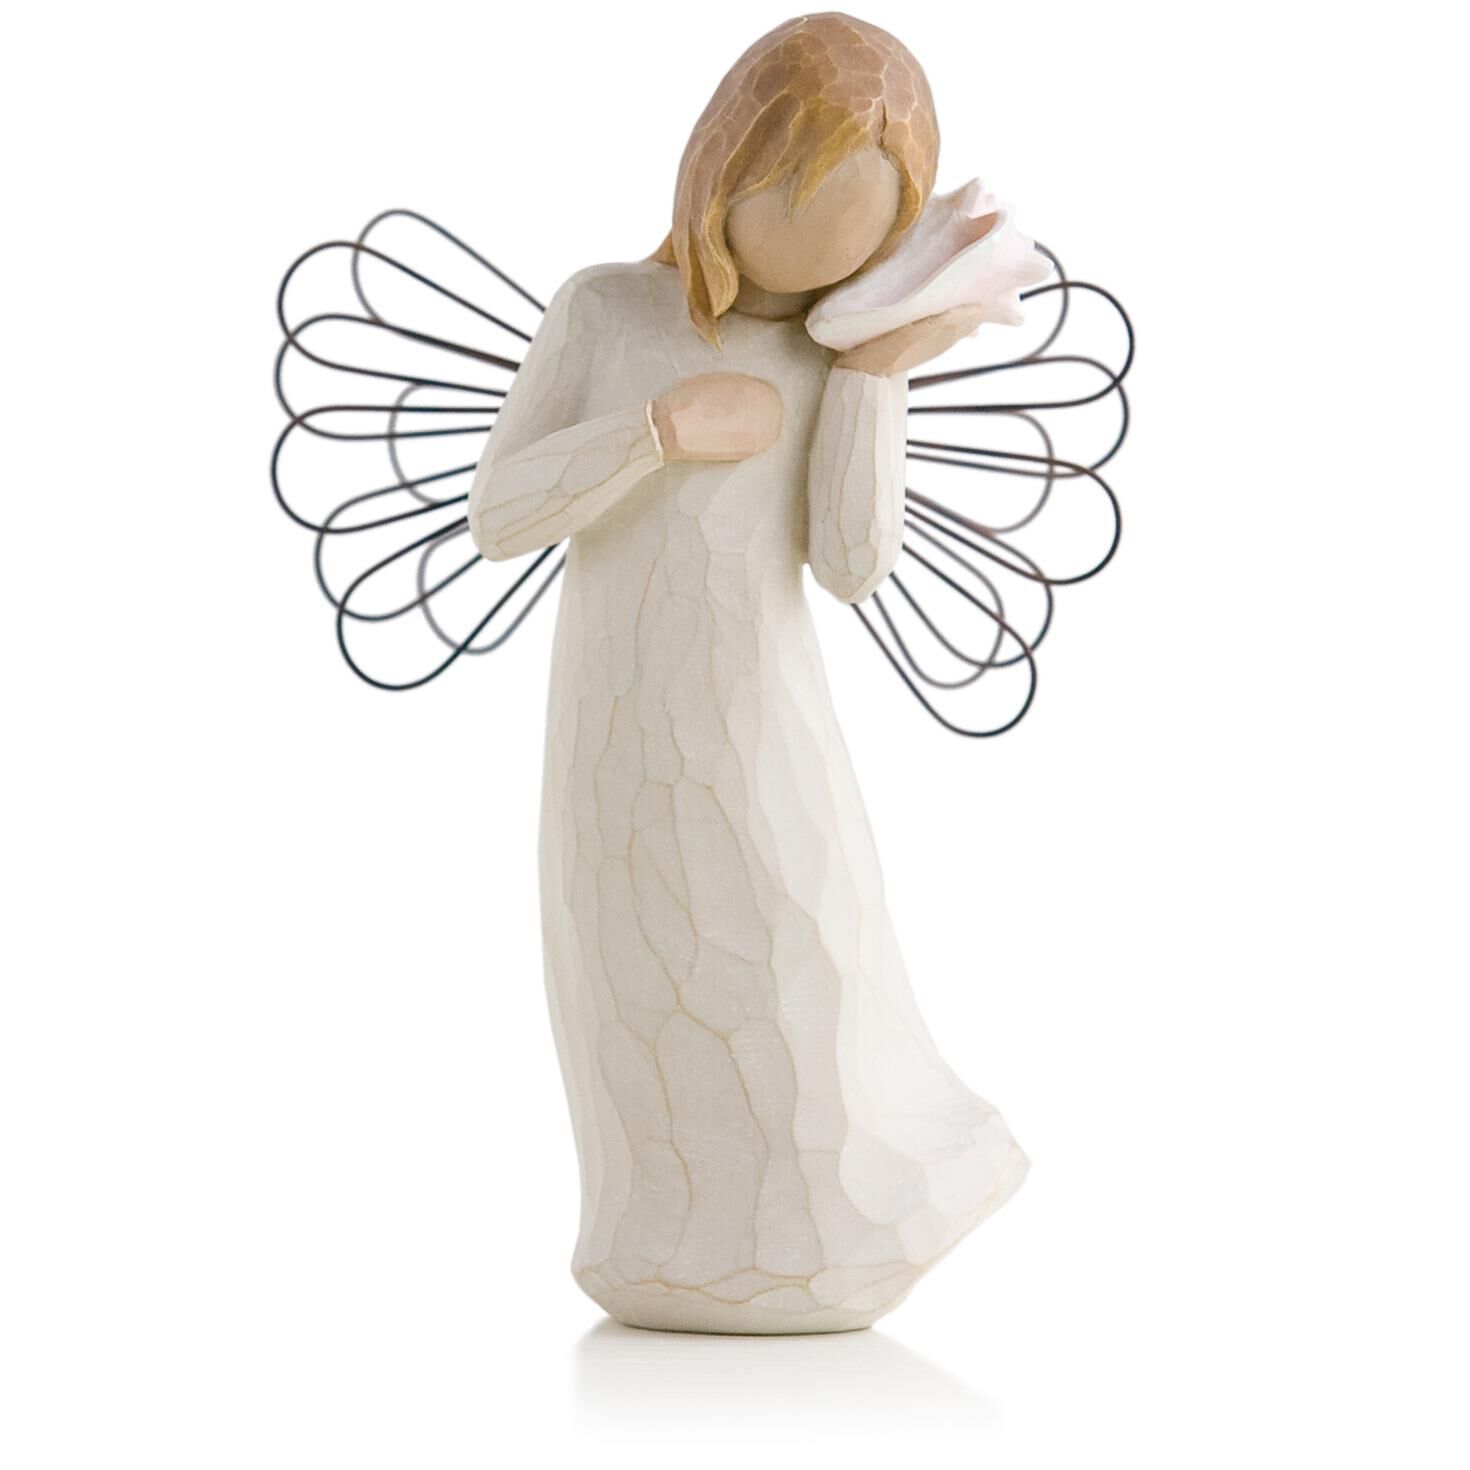 Willow Tree Thinking of You 26131 Hand-Painted Sculpted Figurine Brand New 